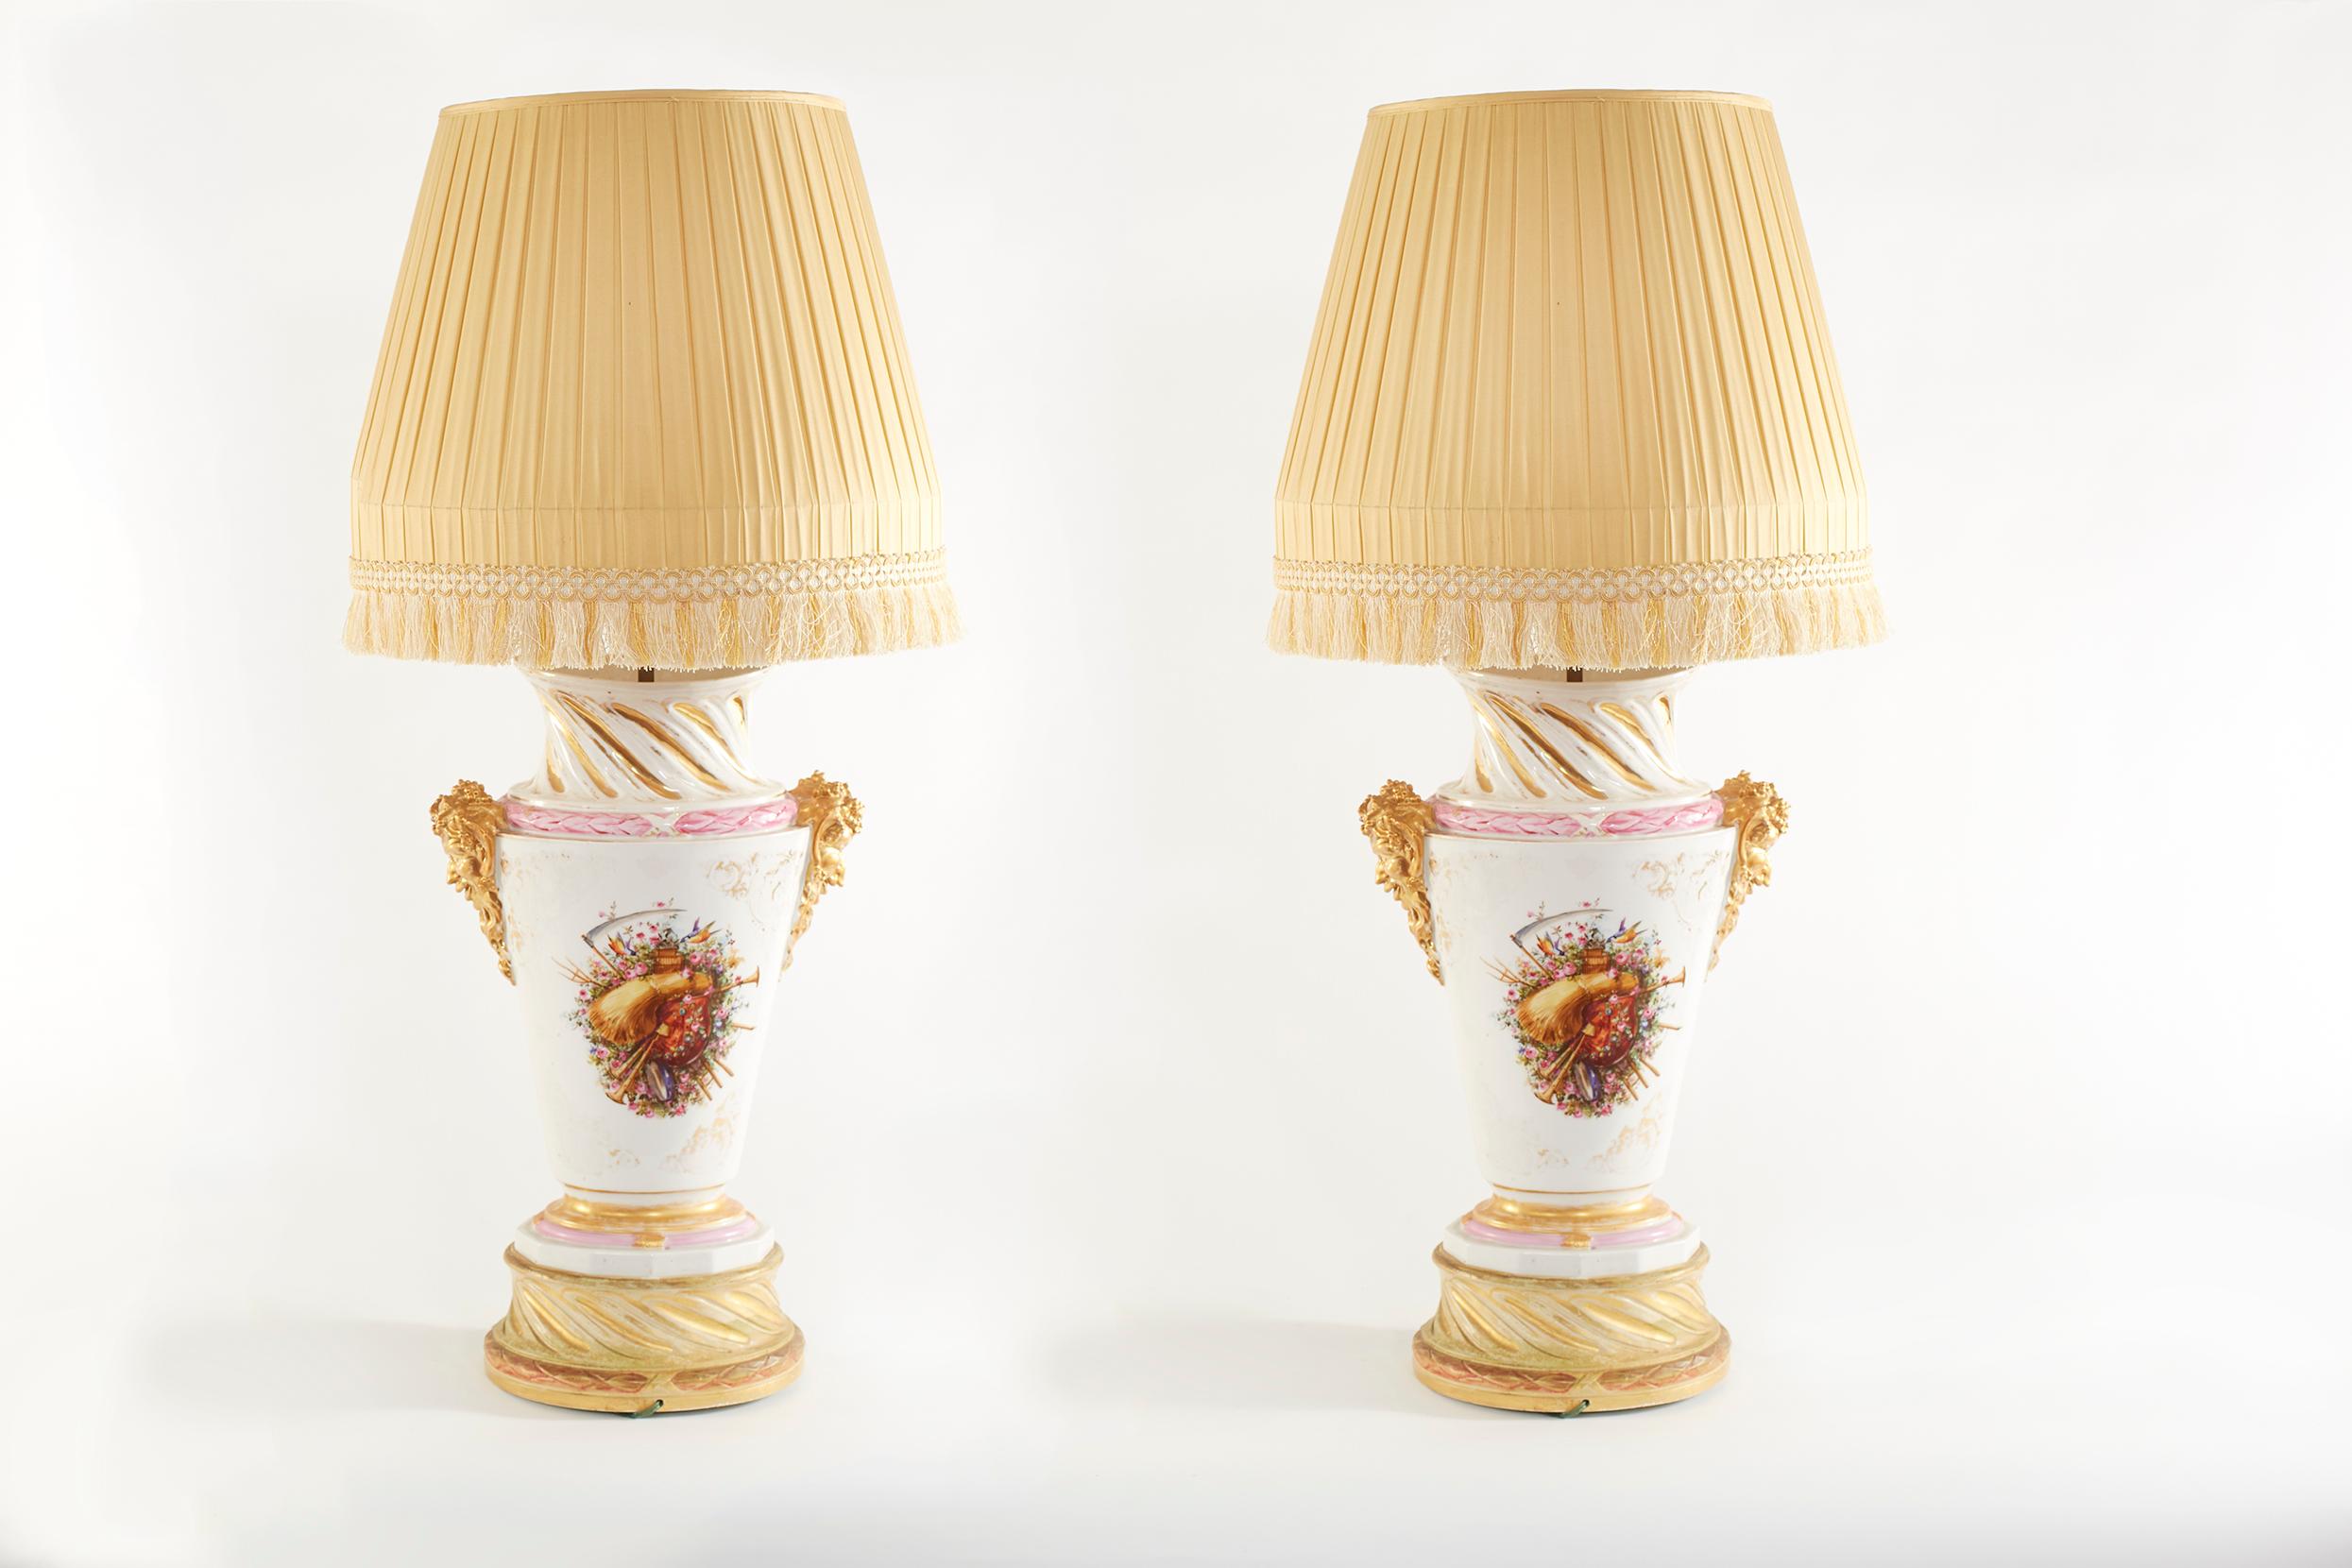 Large pair gilt porcelain urn shape with exterior floral design details table / task lamps. Each lamp is in good working condition. Minor wear appropriate with age / use. Each lamp stand about 38.5 inches high x 18 inches wide. Each one comes with a